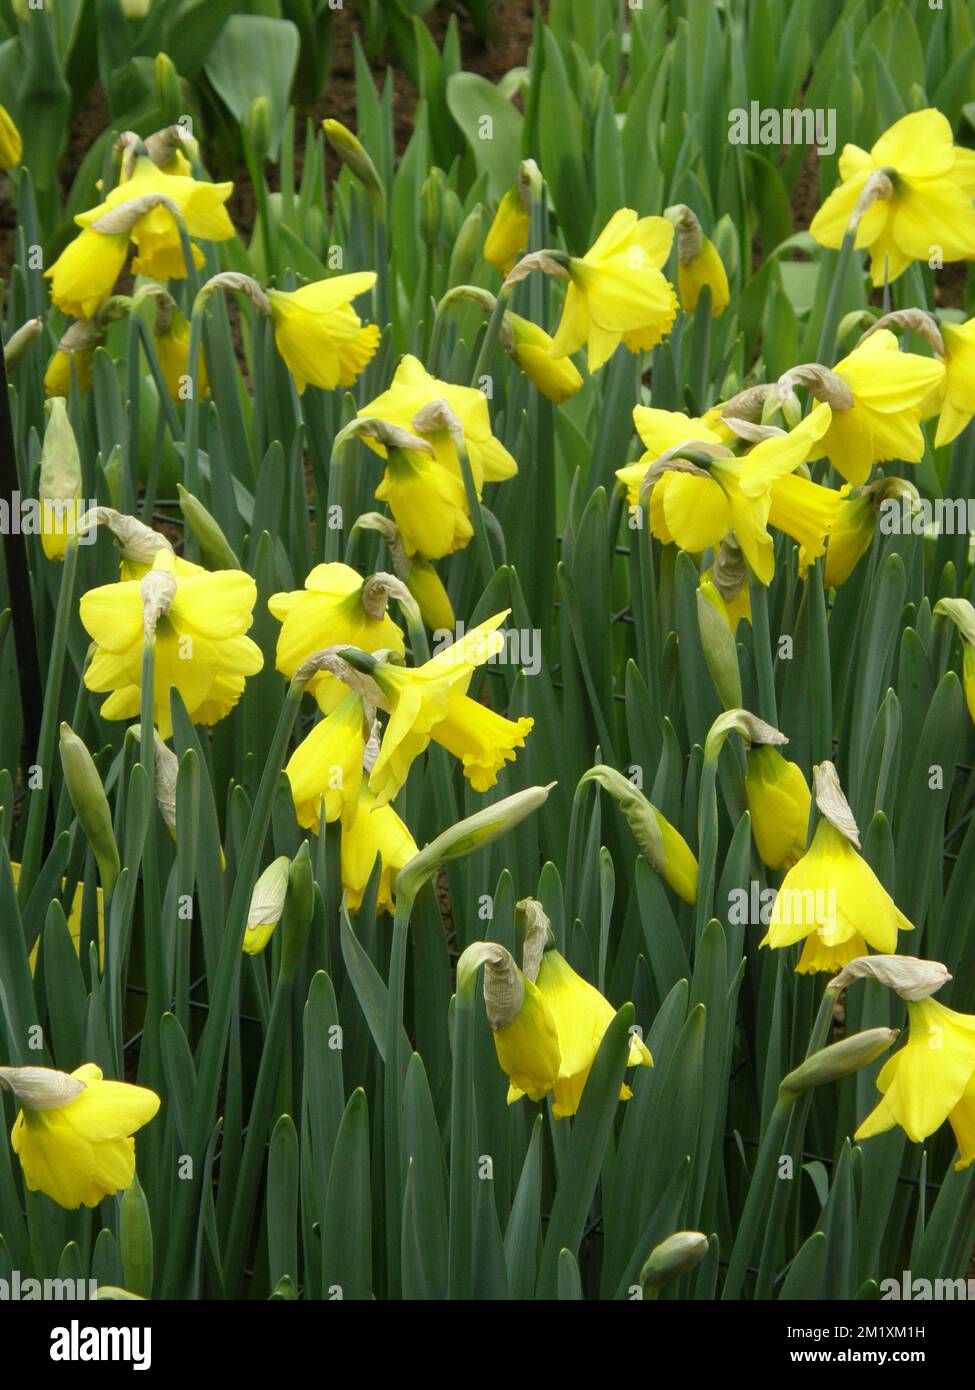 Yellow Trumpet daffodils (Narcissus) Accent bloom in a garden in March Stock Photo